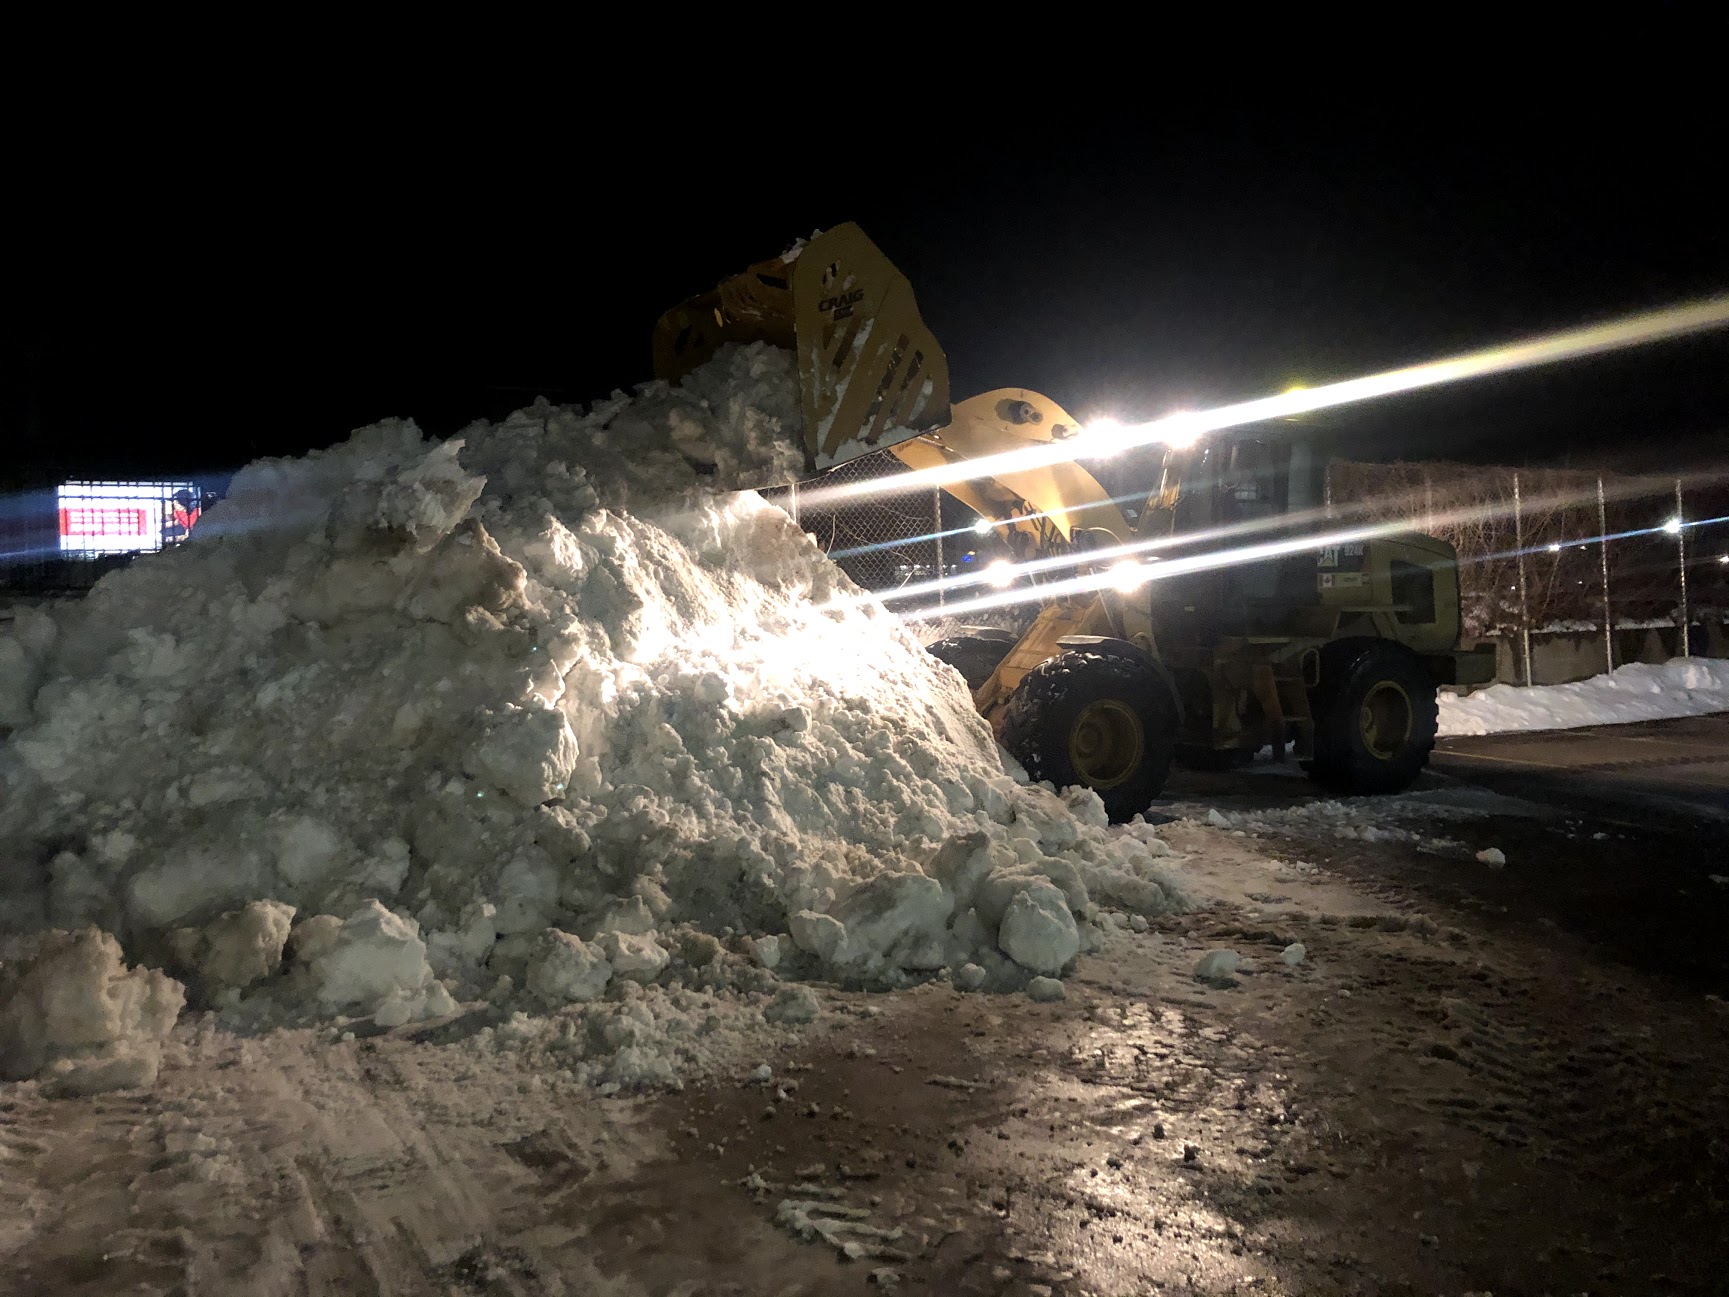 A frontend loader moving a large mound of snow.